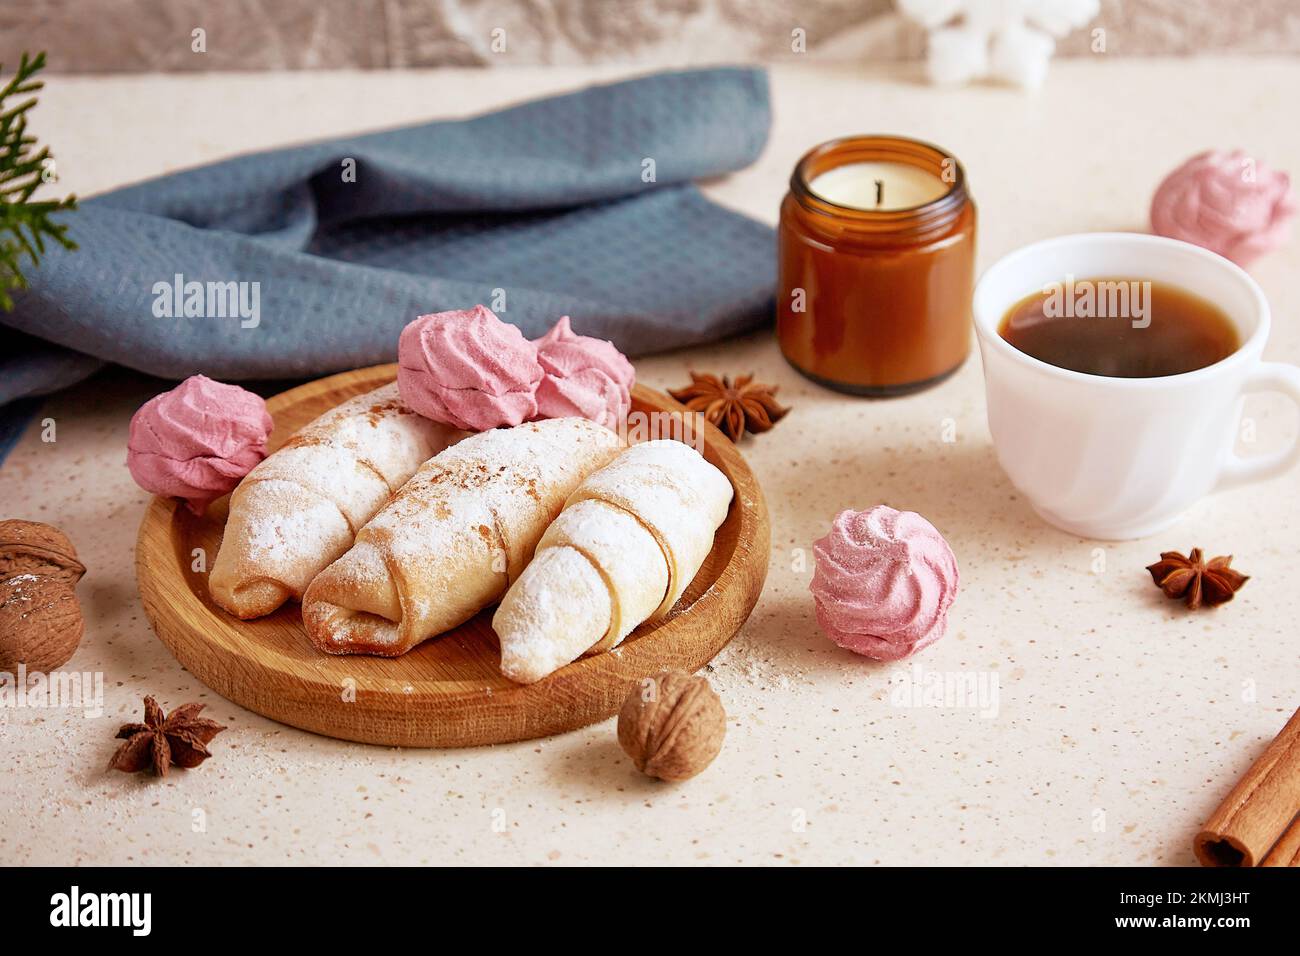 Aesthetics Christmas food background - crescent bagels and marshmallow, walnuts, star anise, coffee. Cozy home. Stock Photo